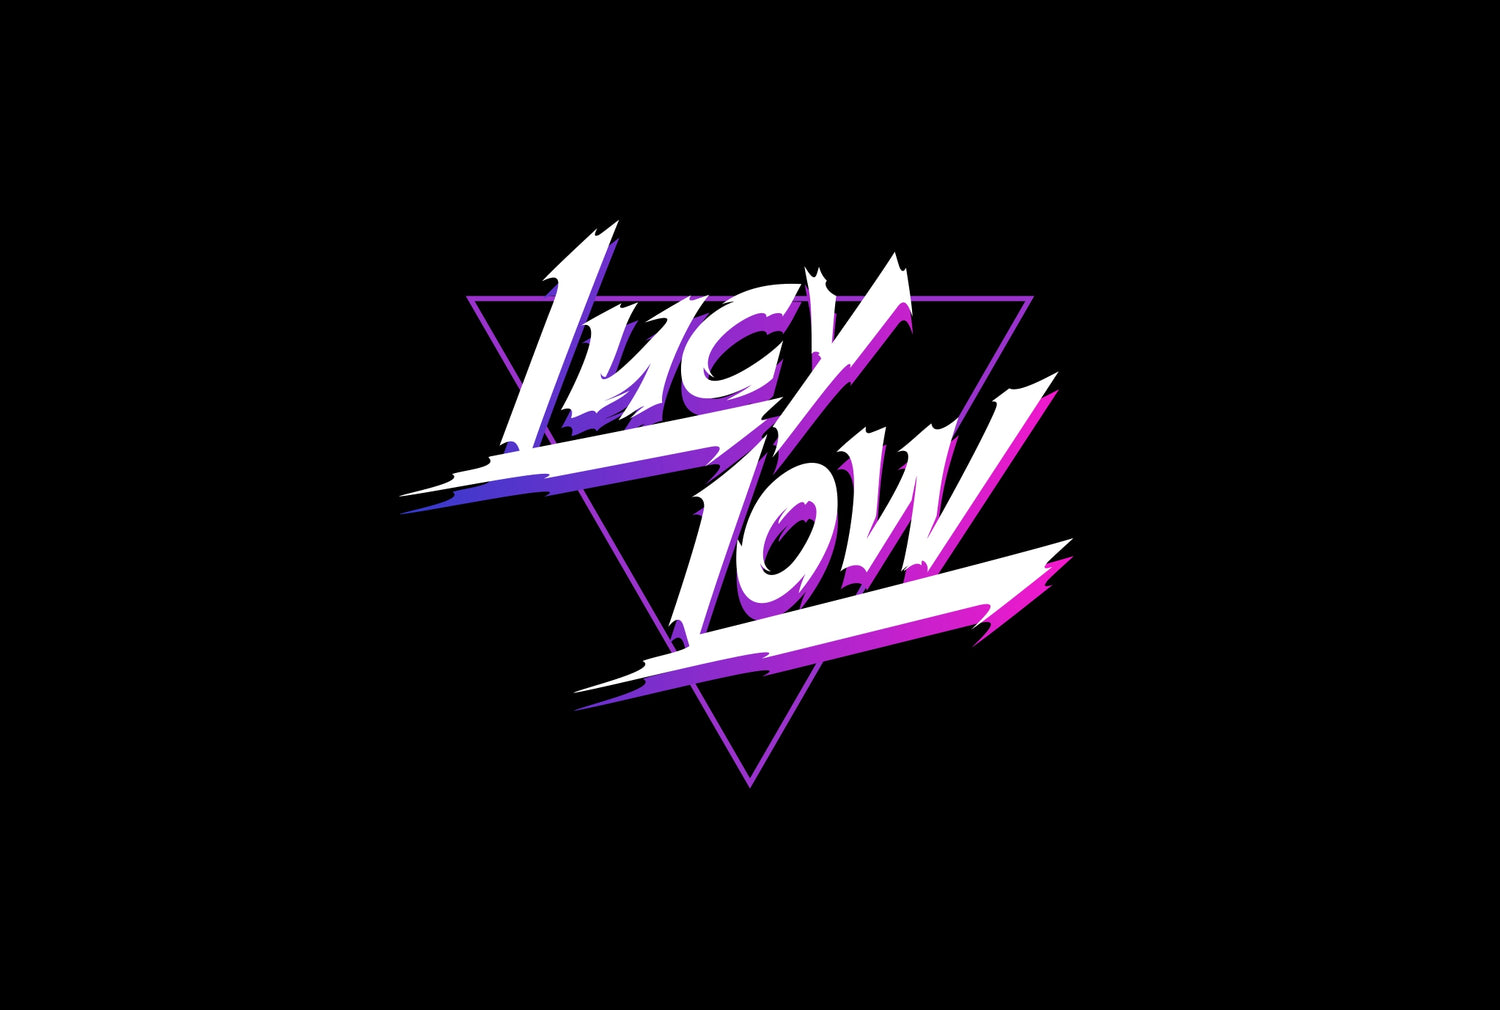 LUCY LOW